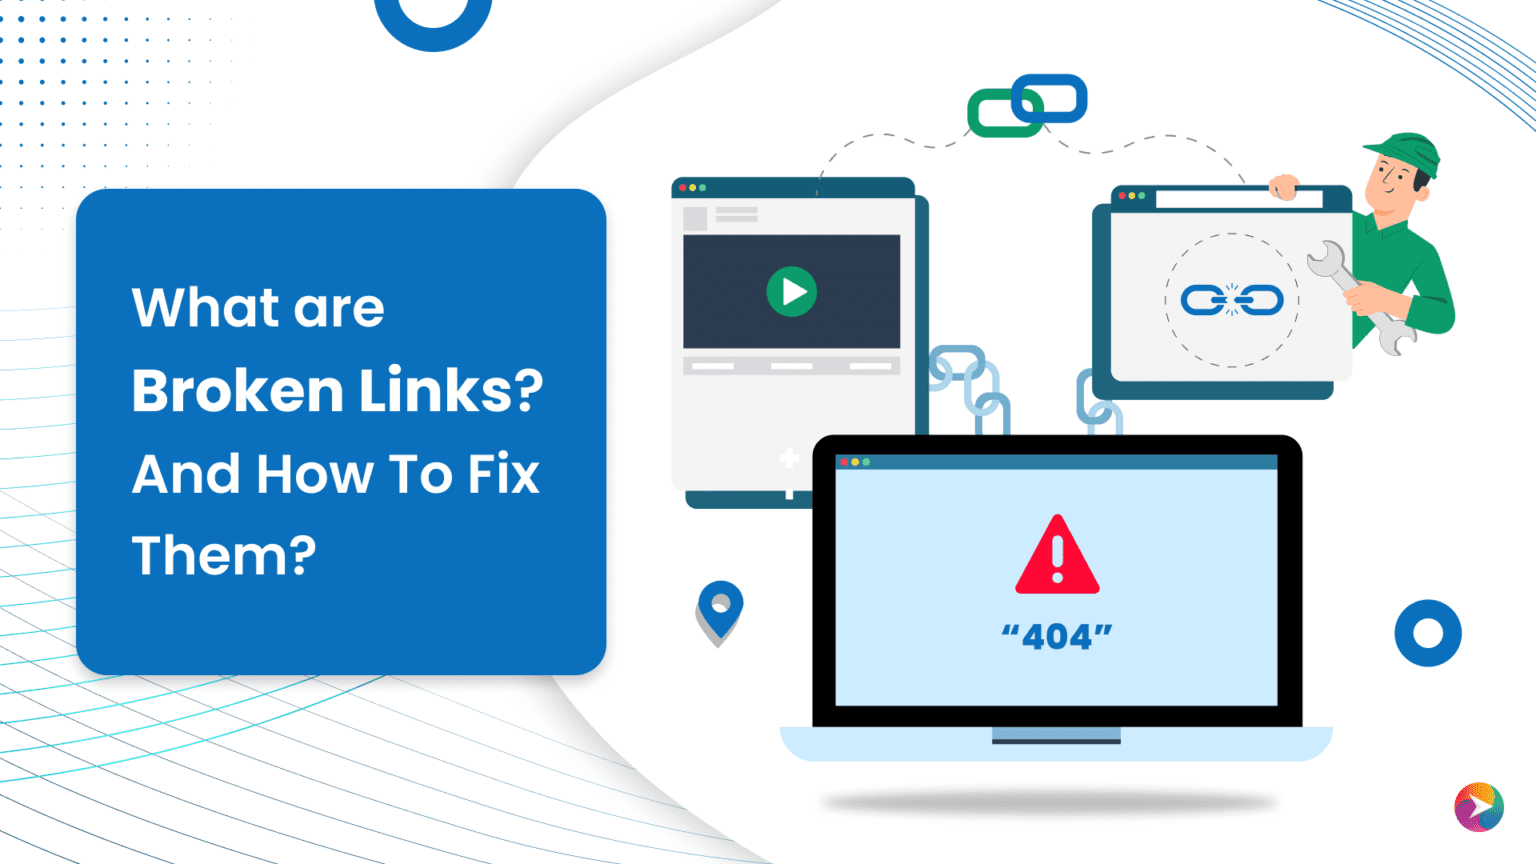 What are Broken Links? And How To Fix Them?